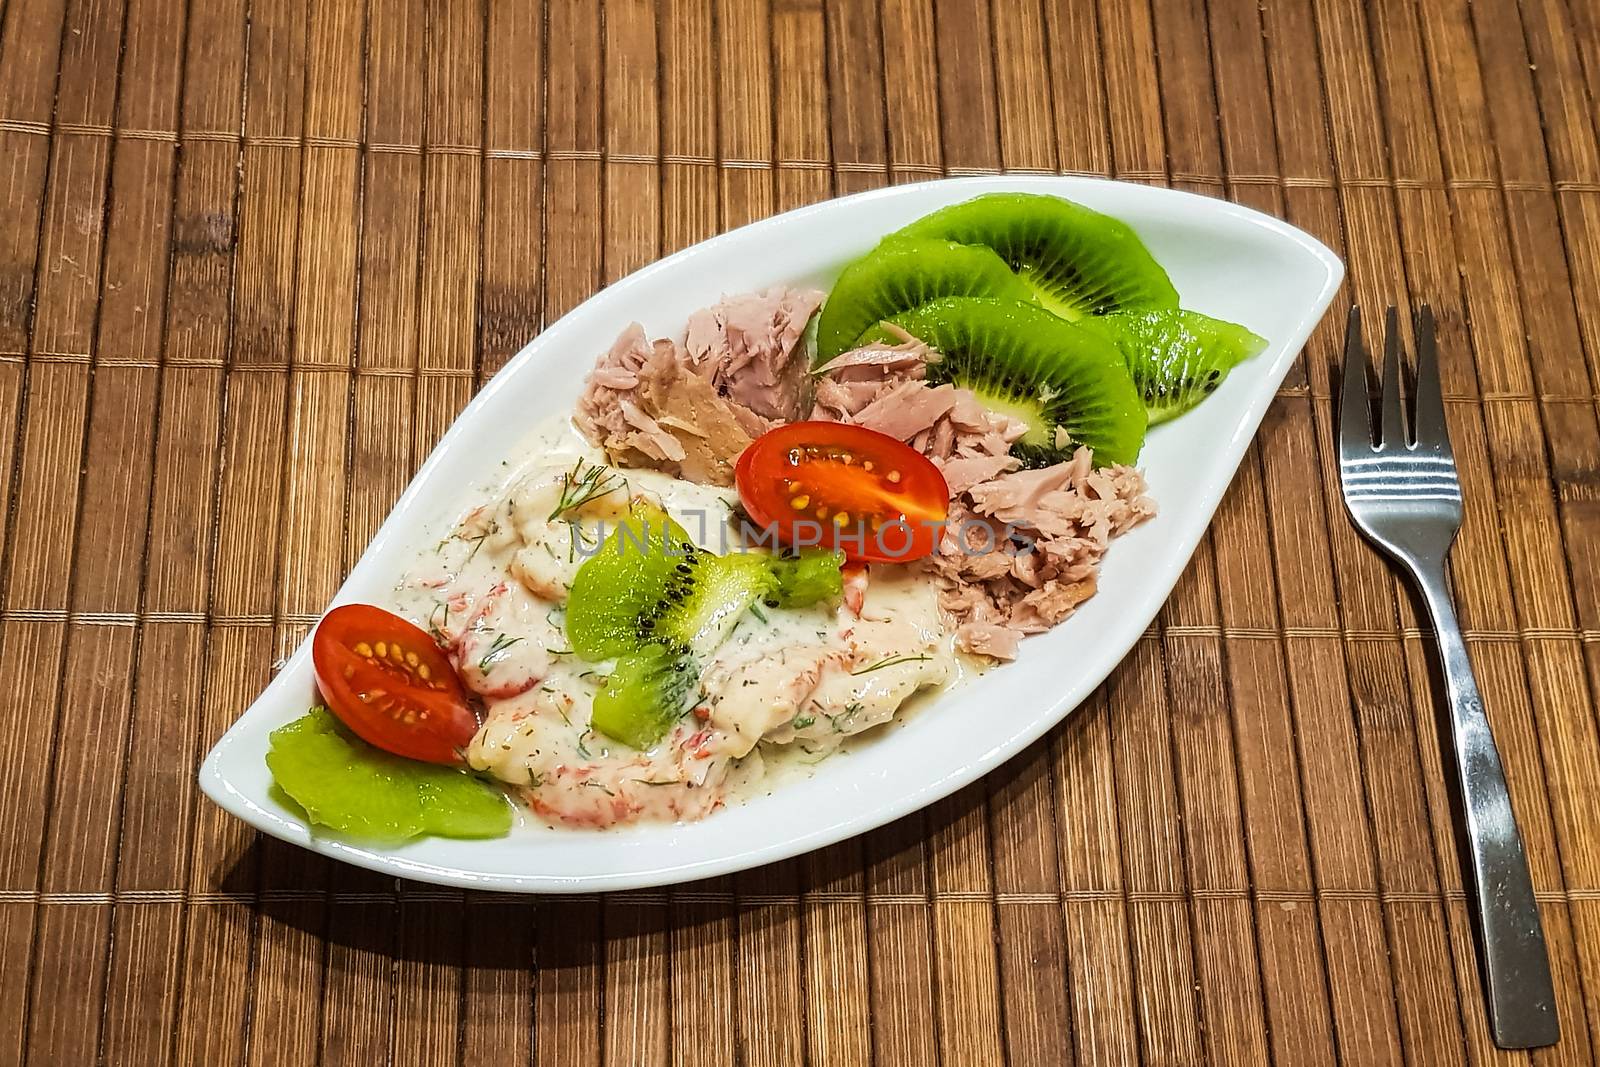 Healthy low-carbohydrate food in small bowl, lunch with tomatoes, tuna, kiwi, shrimp homemade sugar-free sauce.